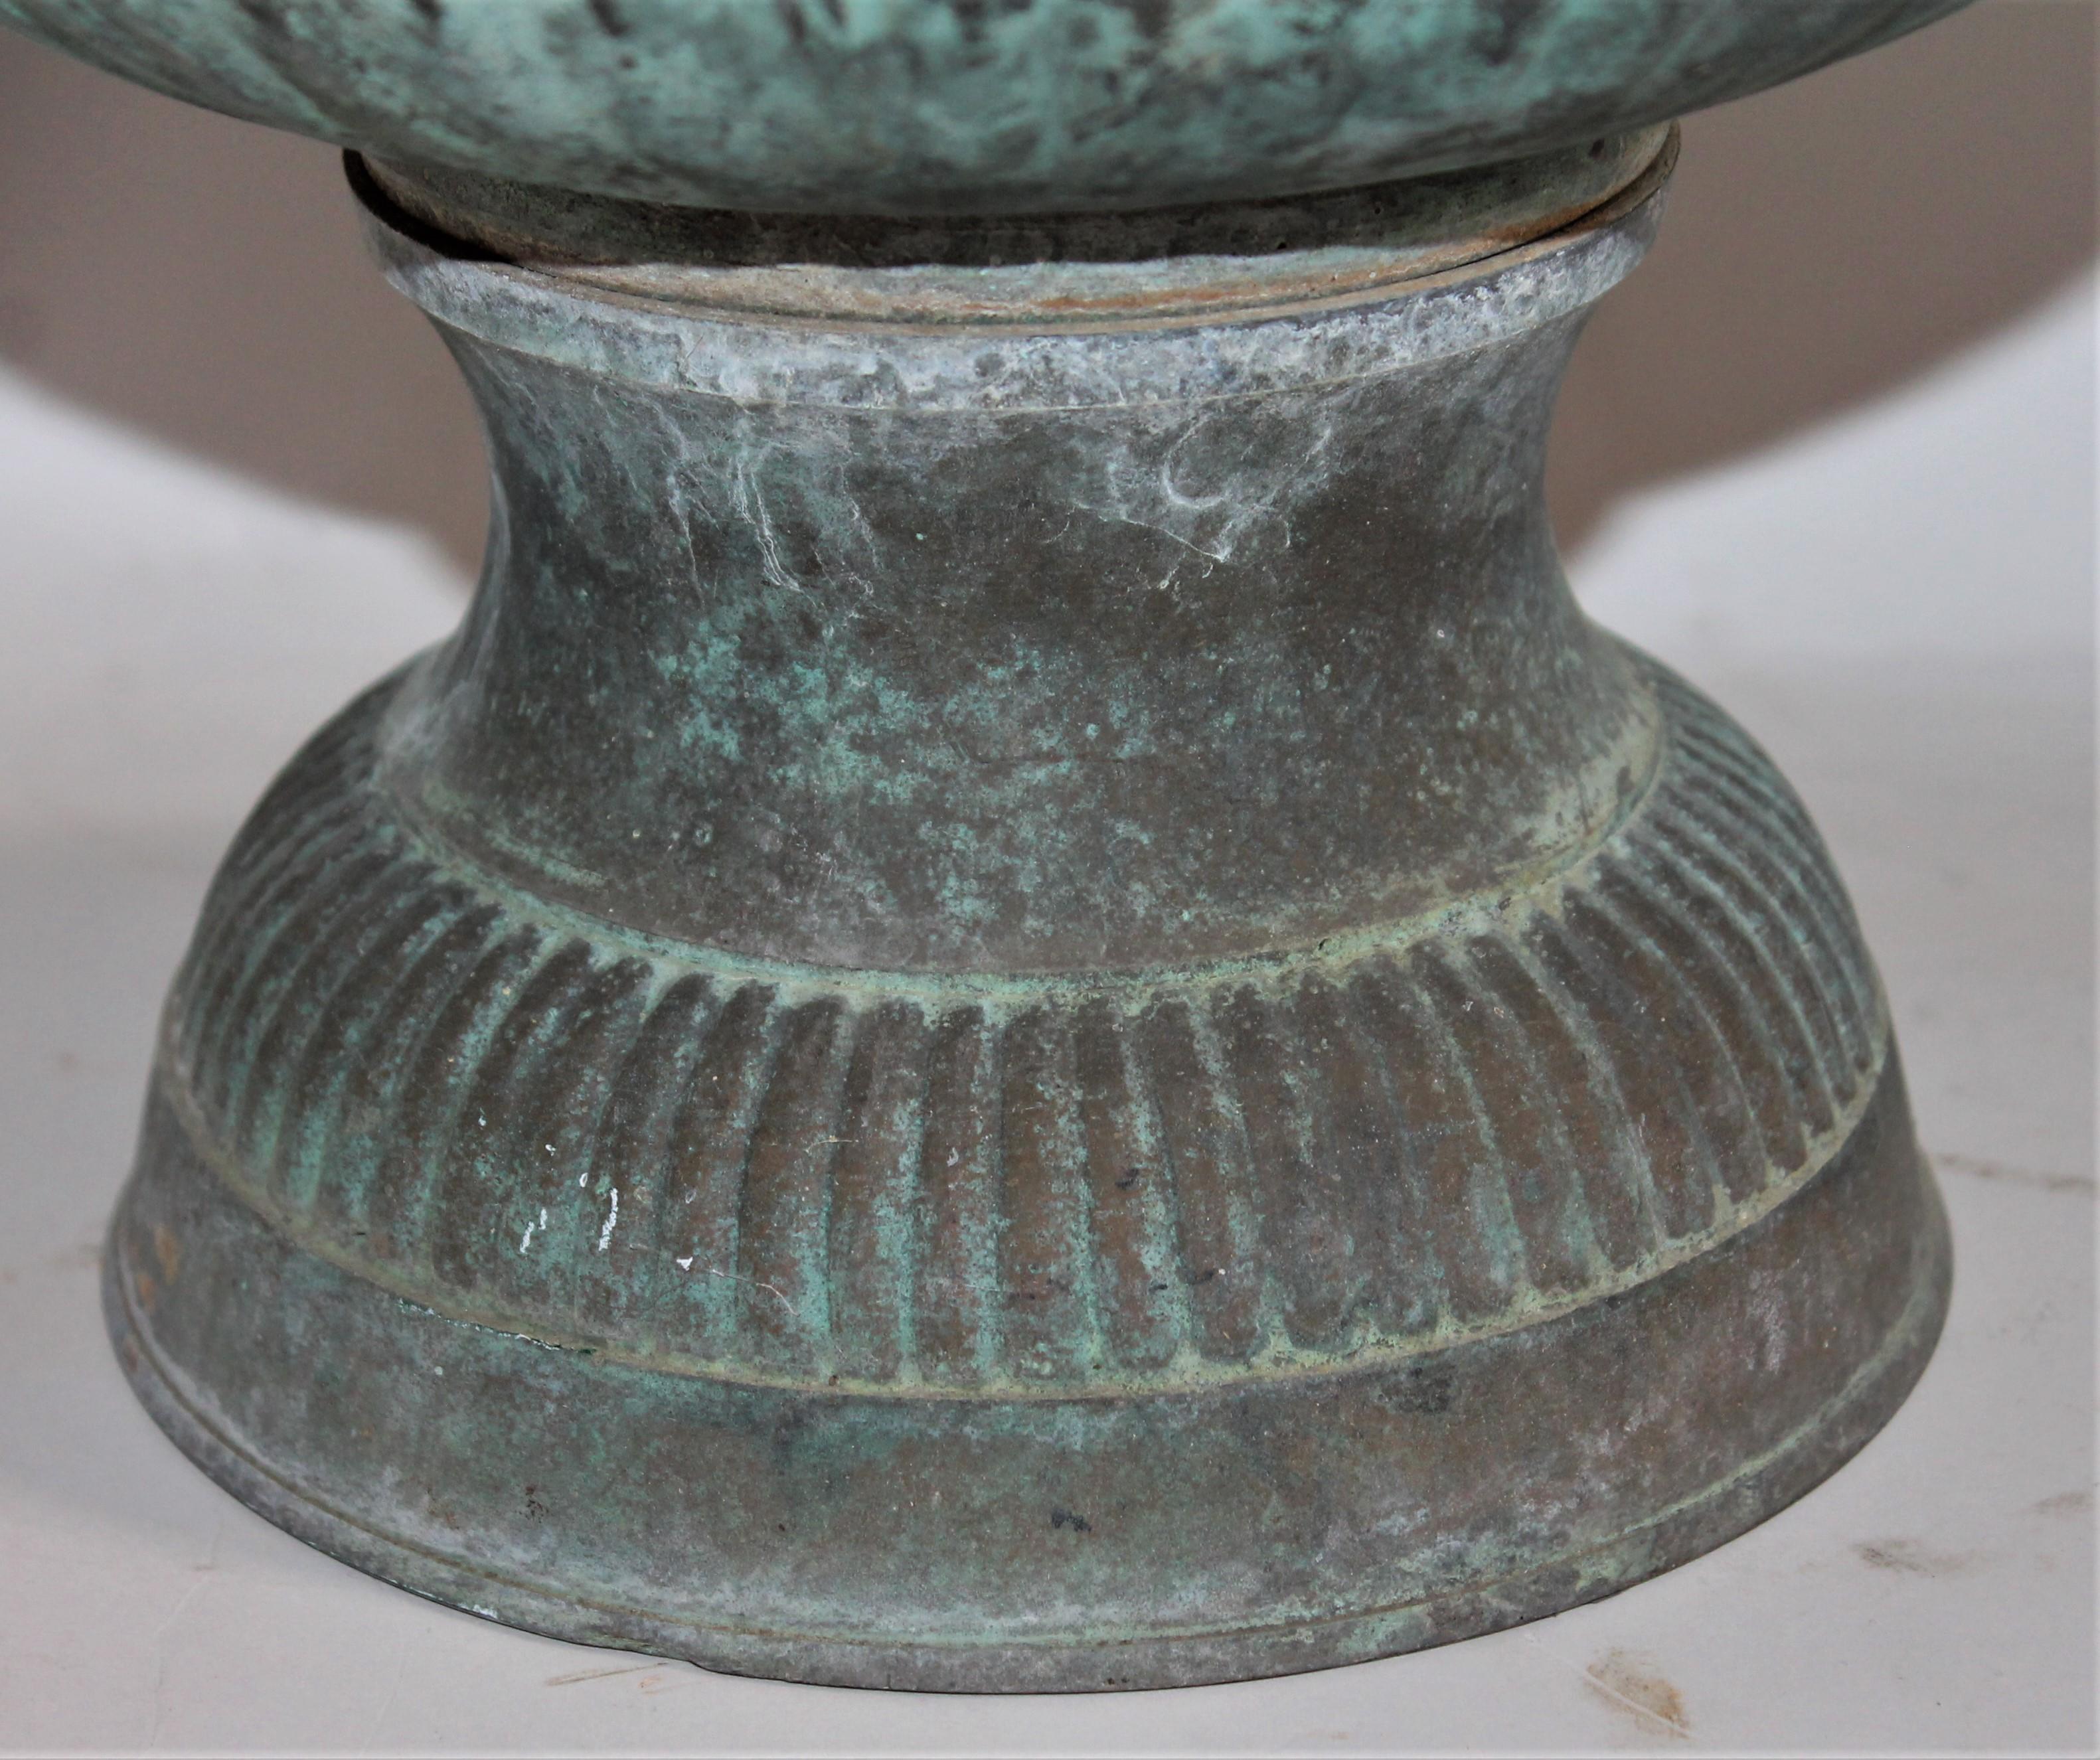 Iron 19th Century Urn with Handles in Patinated Copper Surface